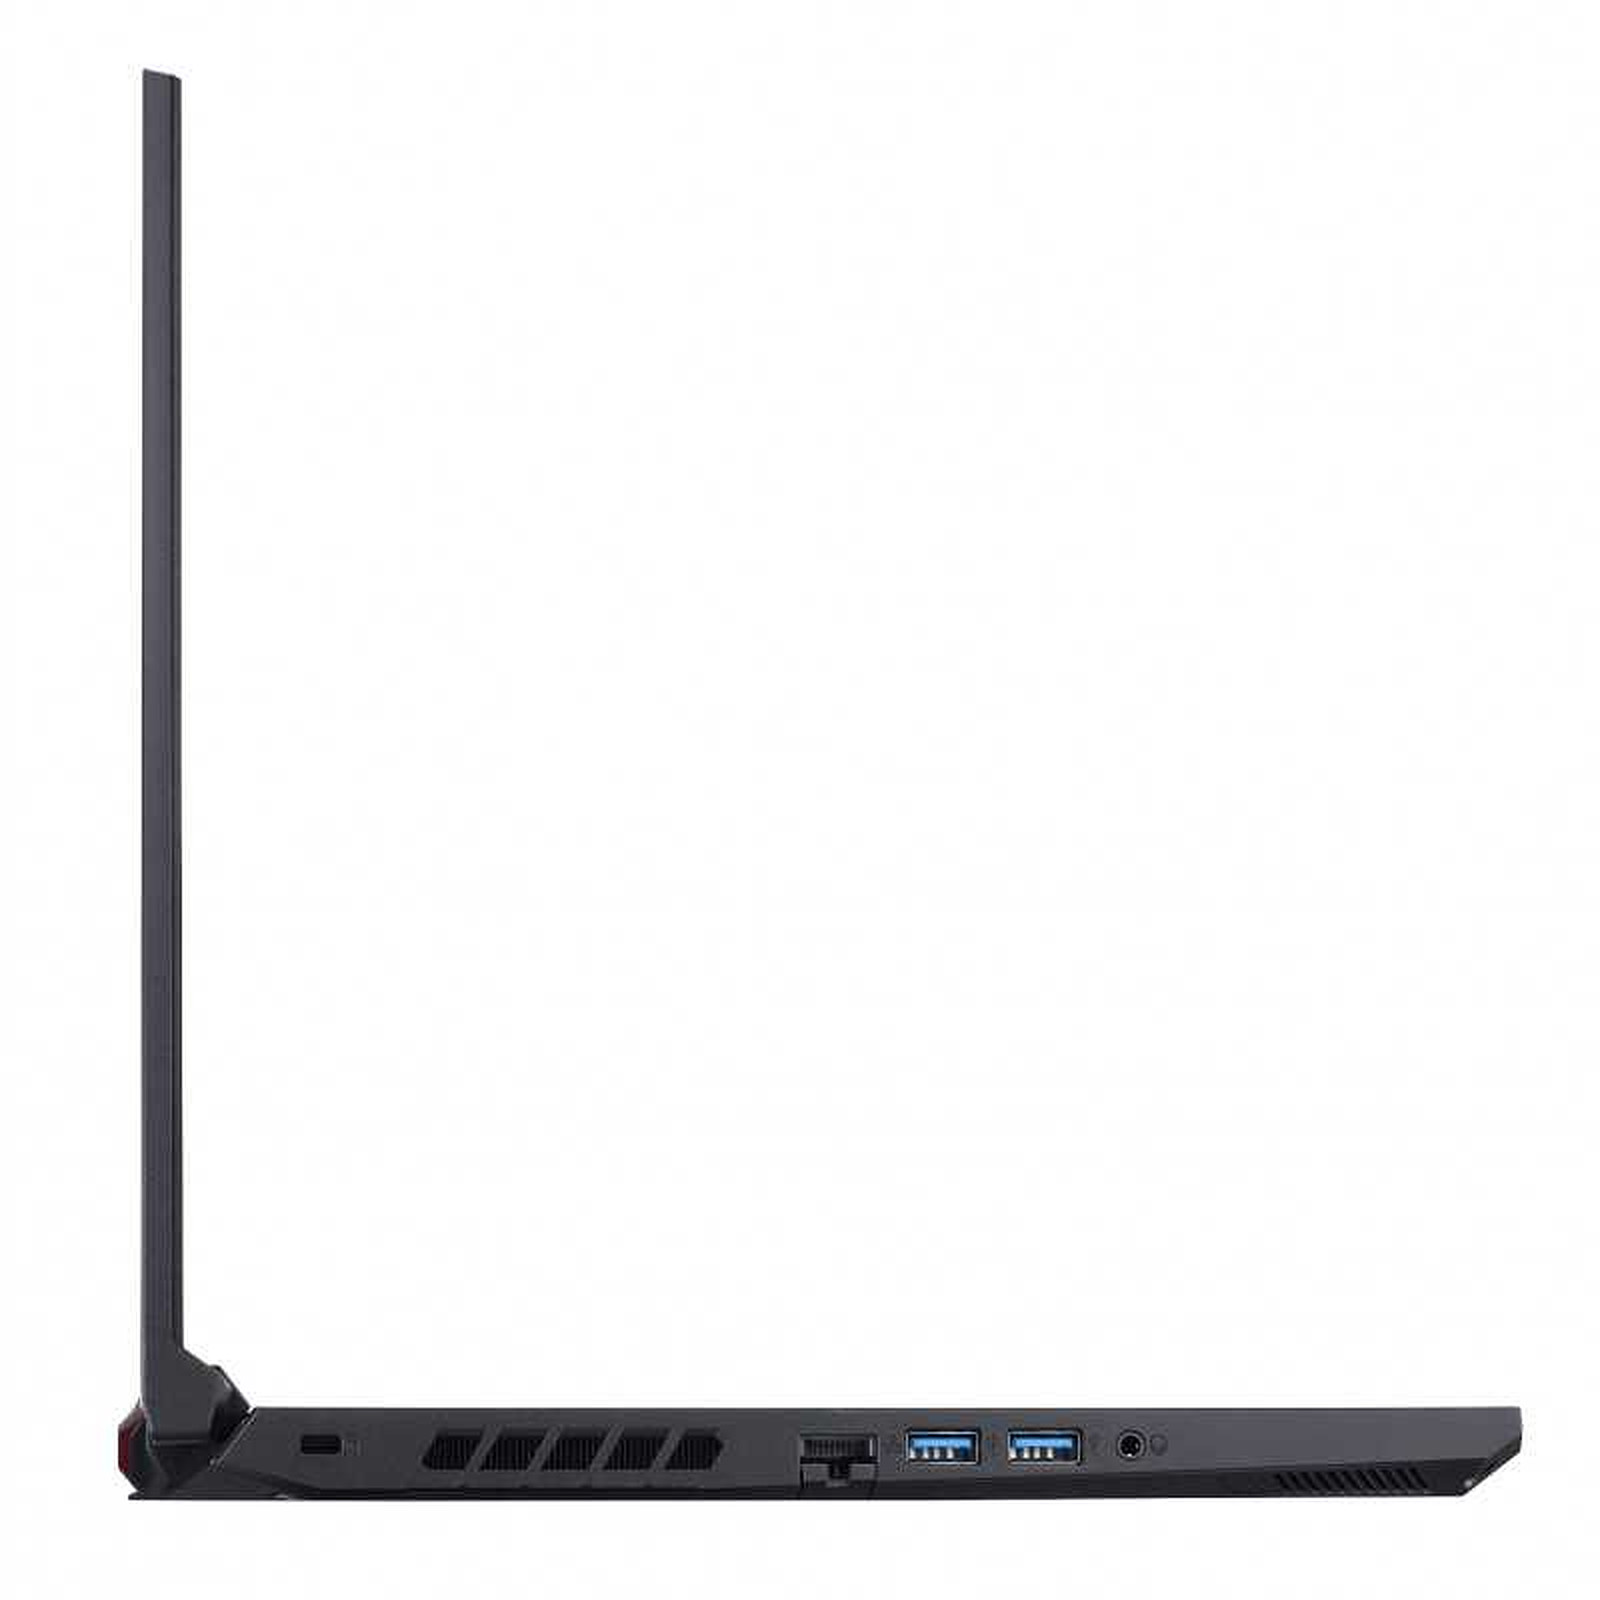 Acer NH.QEKEF.001 - PC portable Acer - grosbill-pro.com - 4